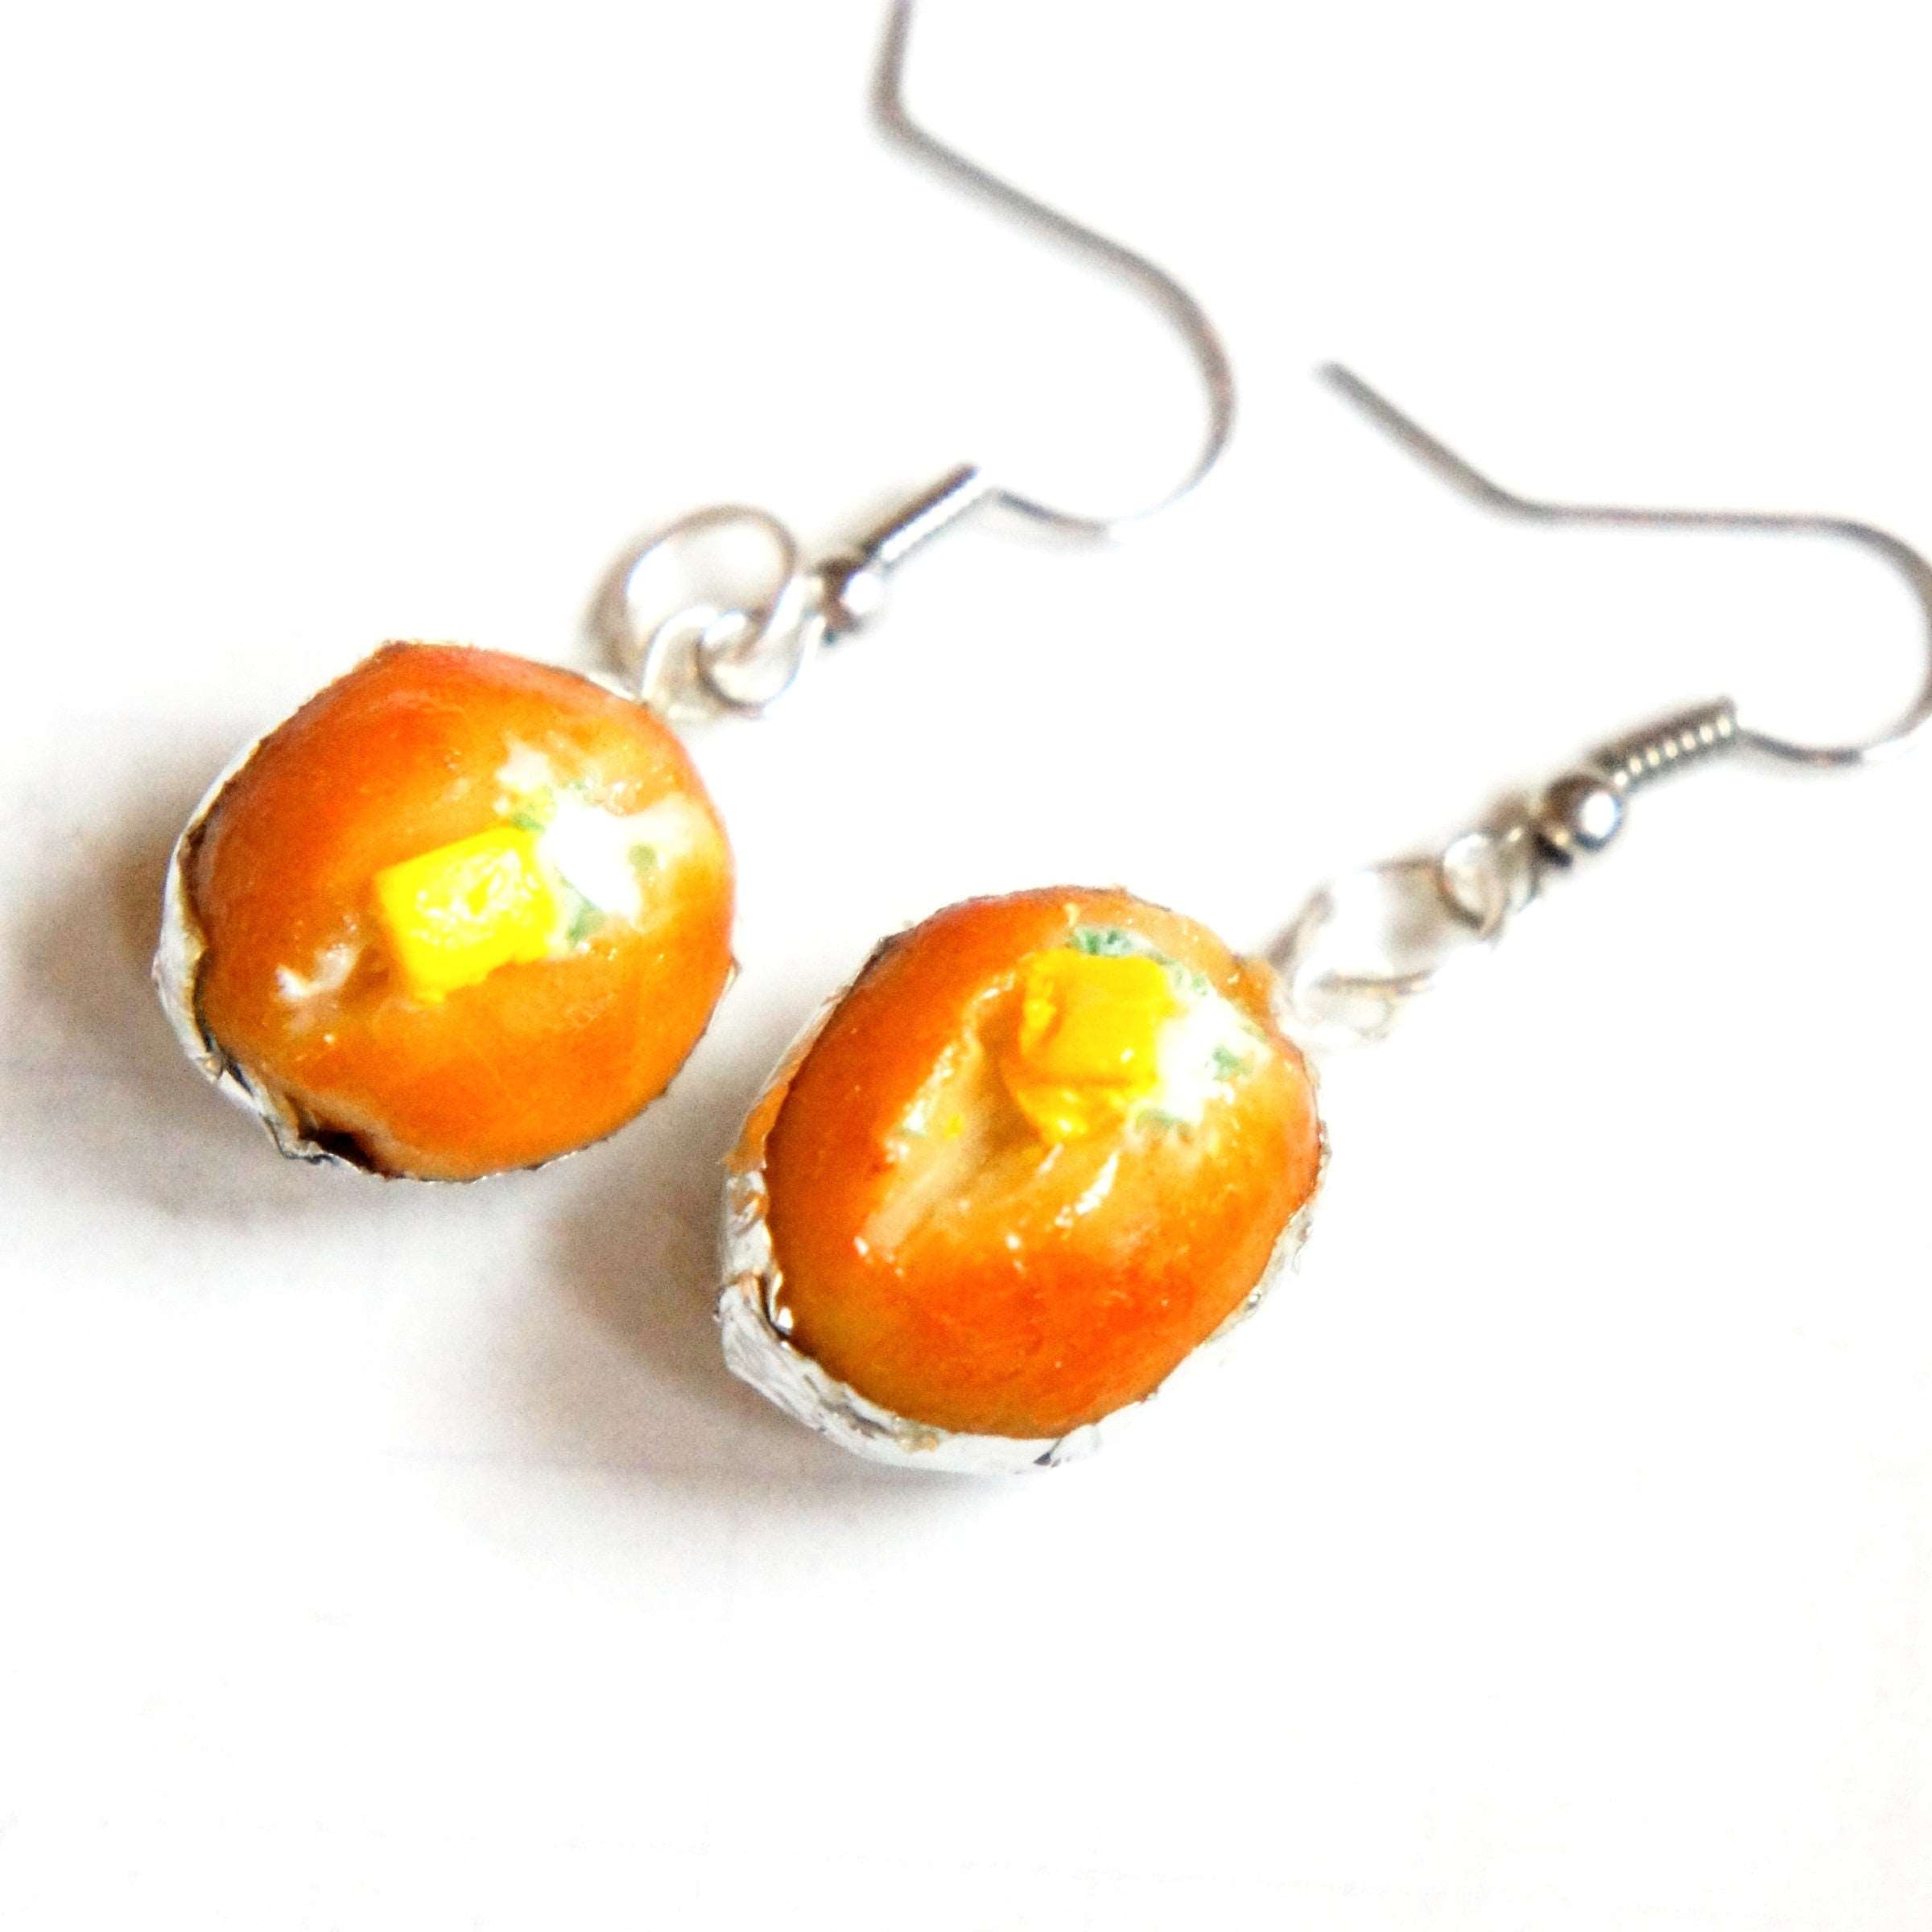 Baked Potato Dangle Earrings - Jillicious charms and accessories